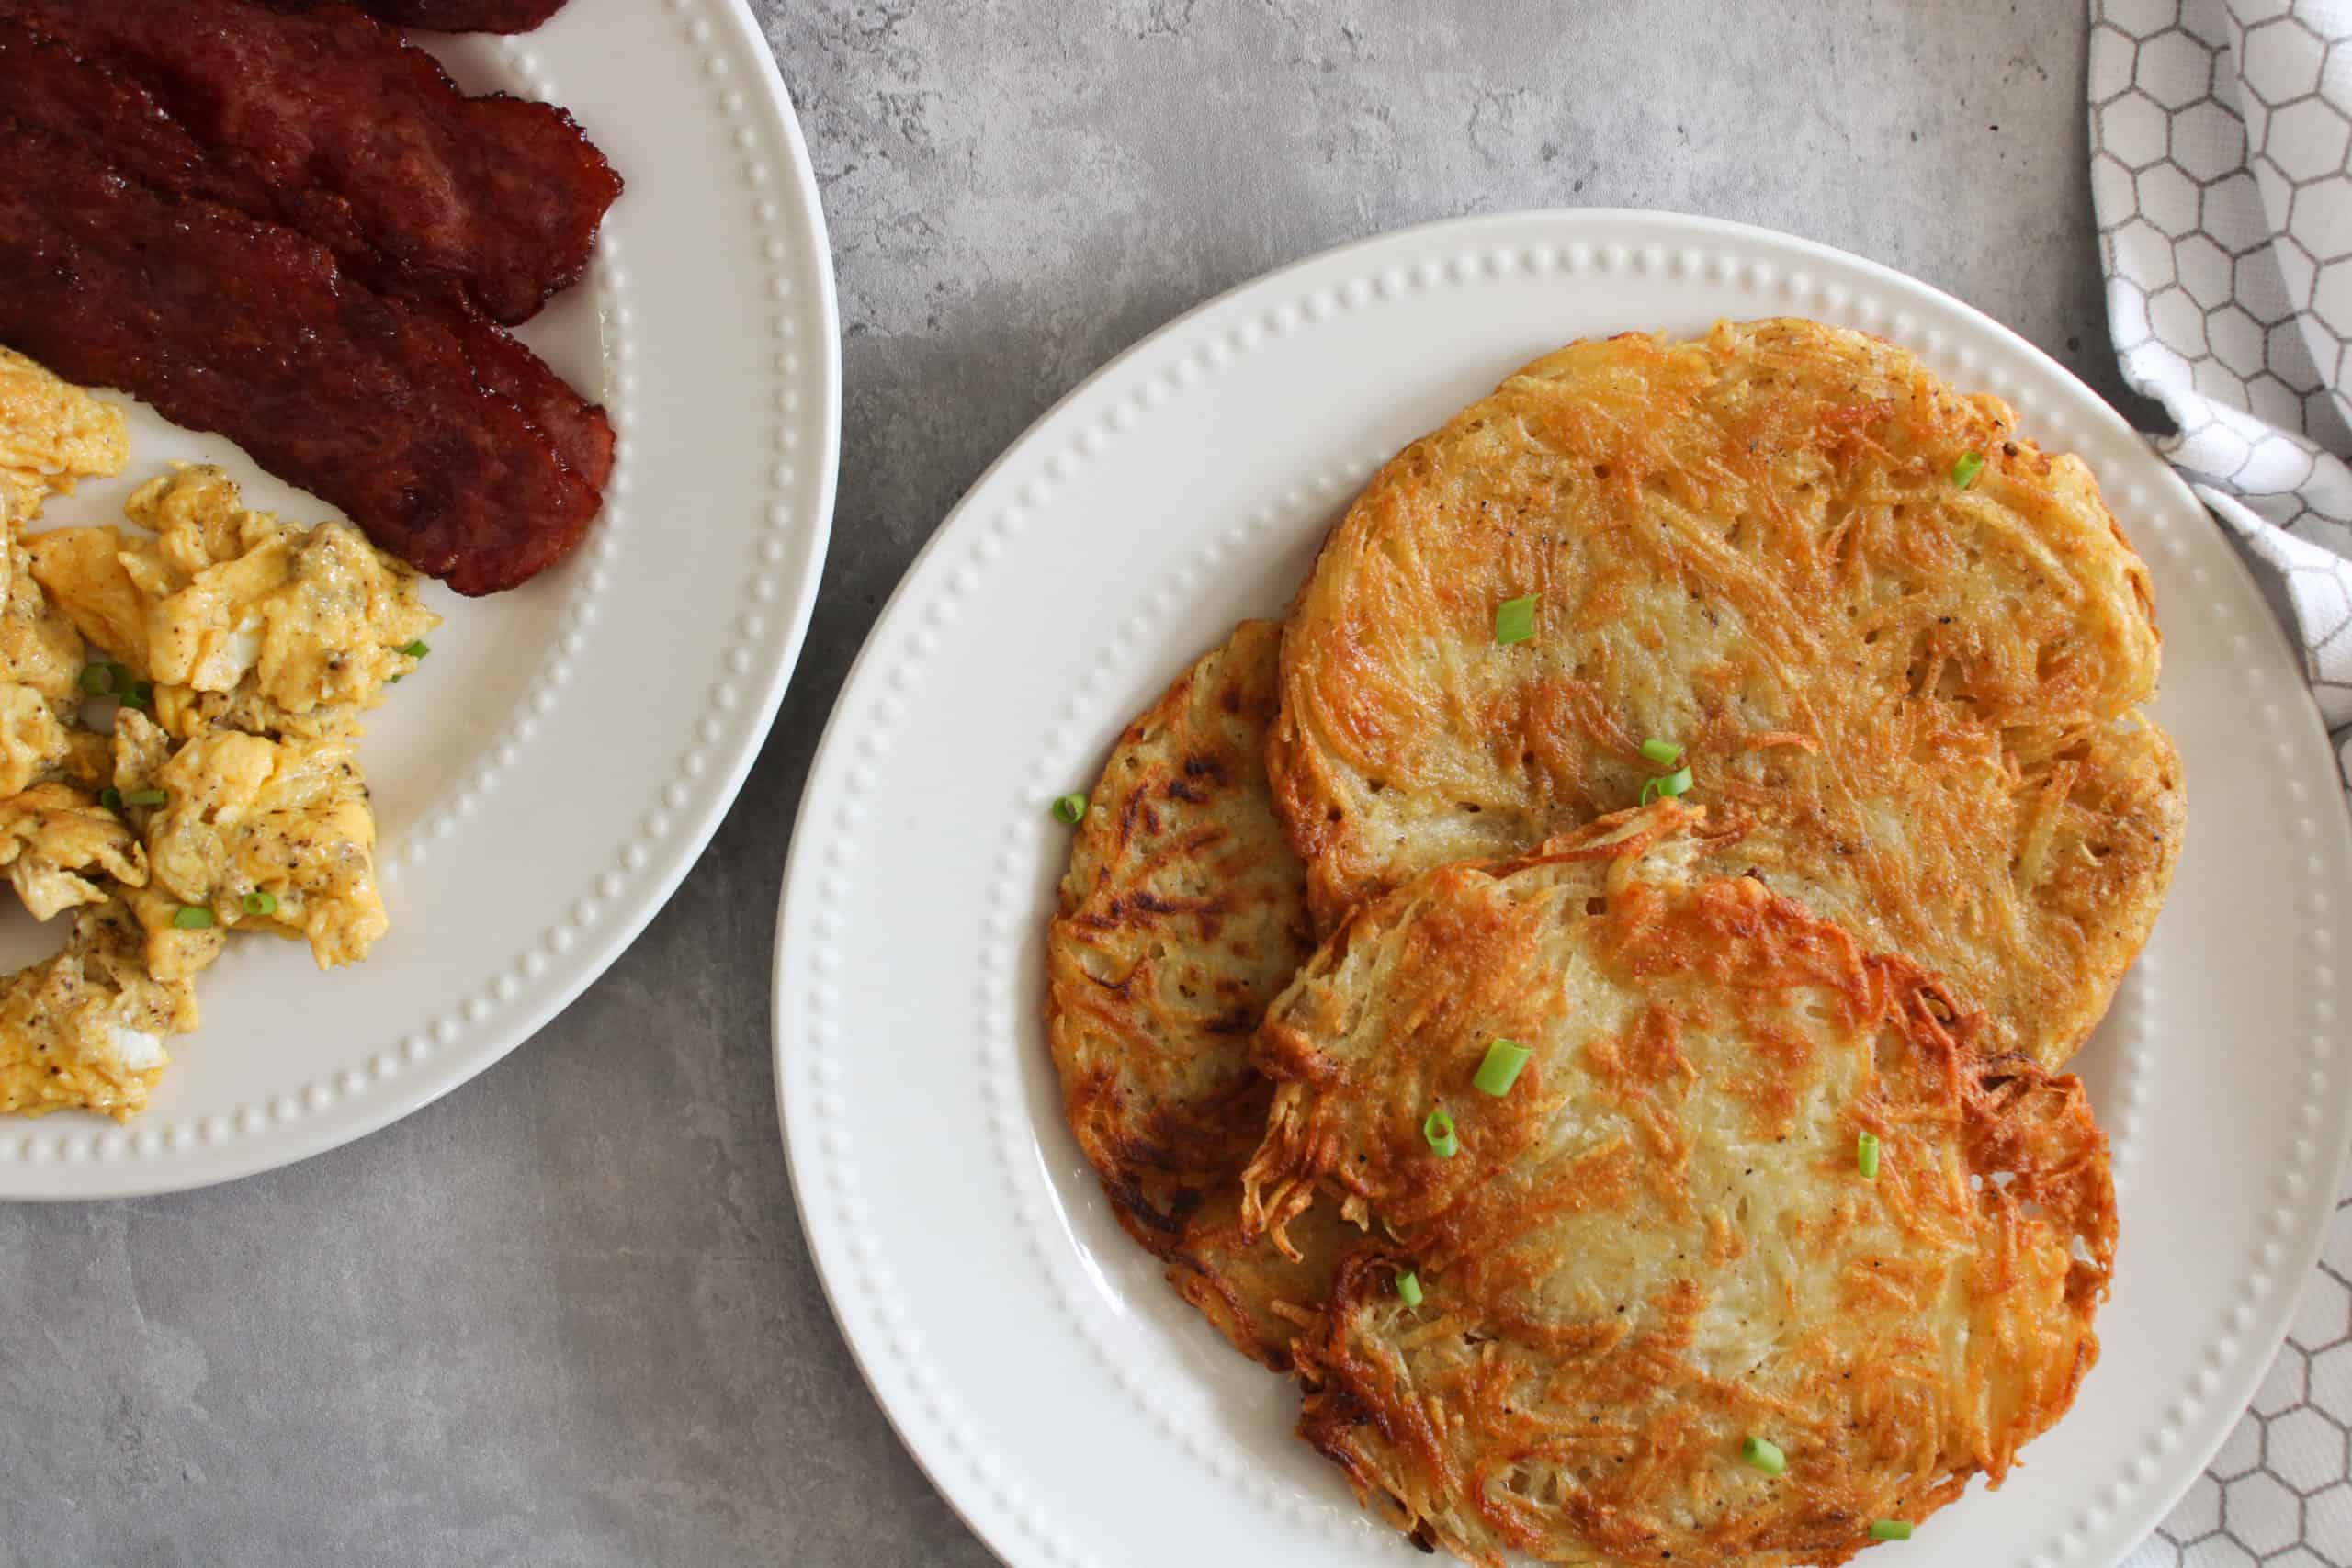 https://www.themidwestkitchenblog.com/wp-content/uploads/2021/12/hash-browns-and-eggs-scaled.jpg